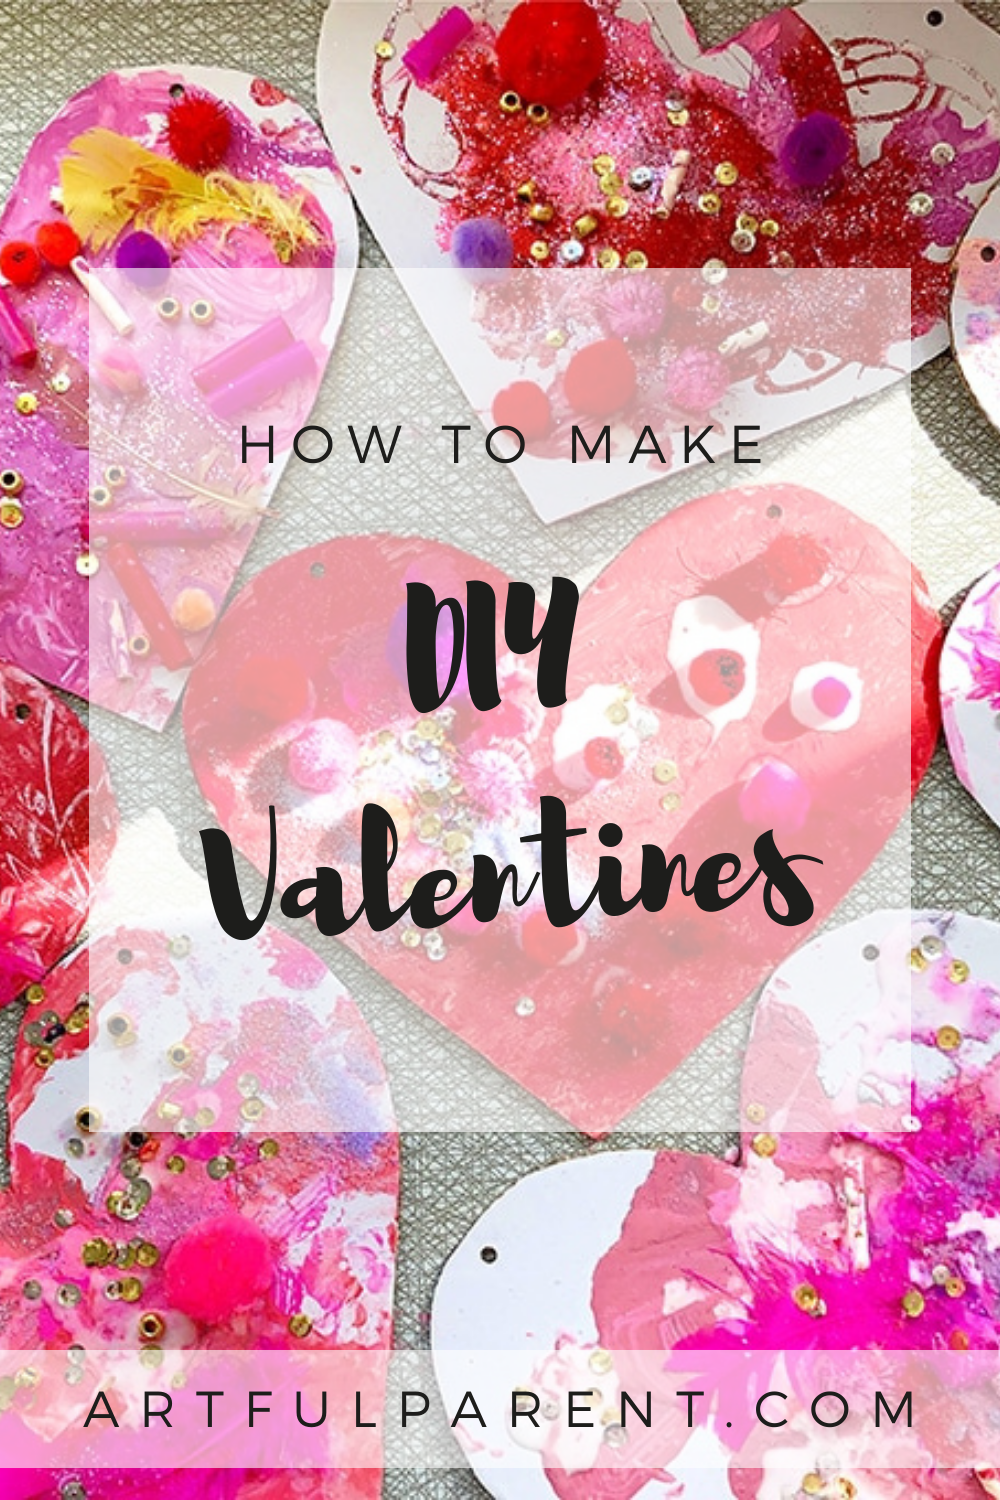 How to Make DIY Valentines for Kids with Cardboard Hearts